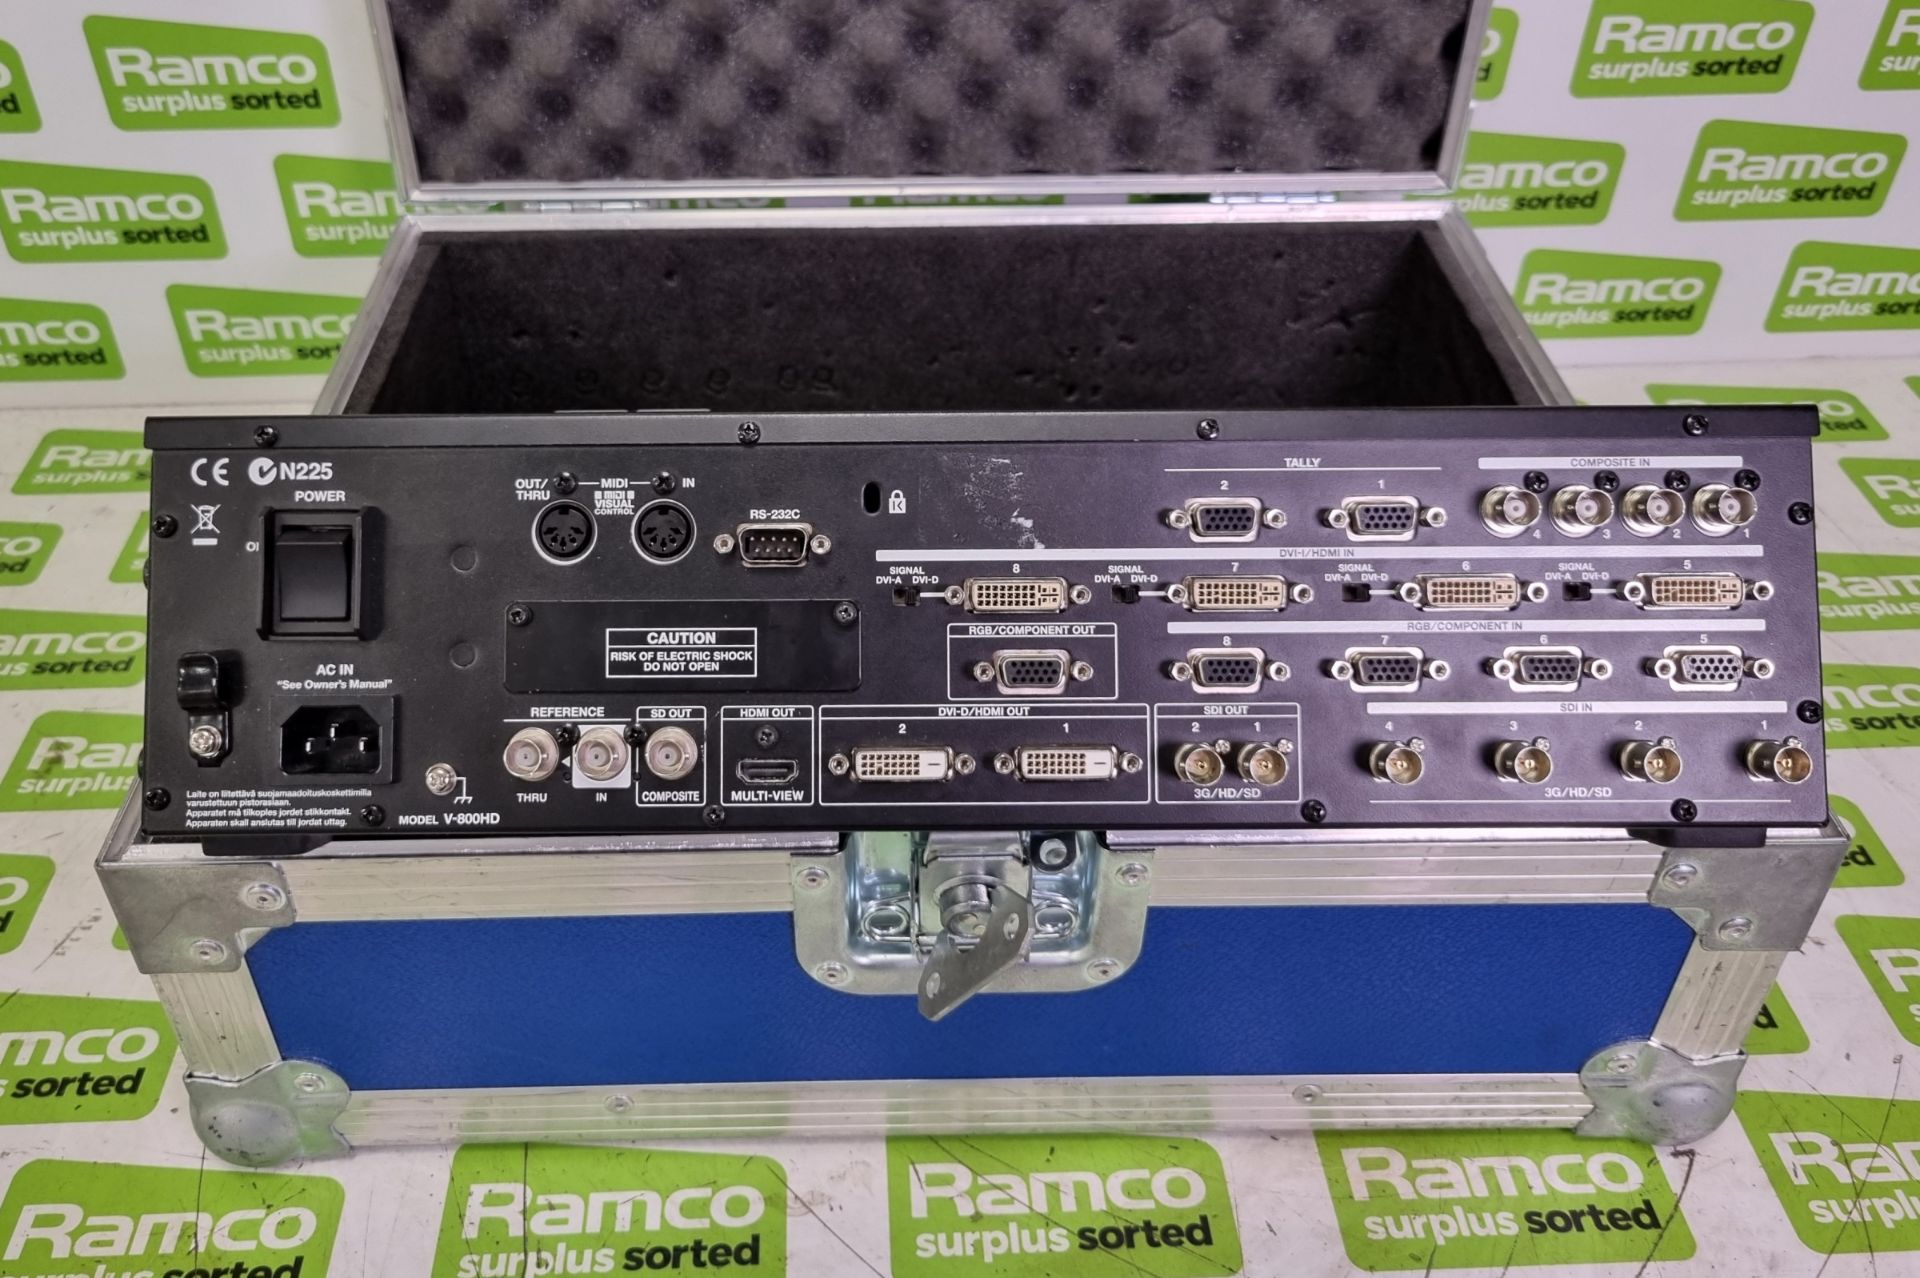 Roland V-800HD multi-format video switcher with flight case - FAULTY (OUTPUT 3/4 FREEZING) - Image 5 of 9